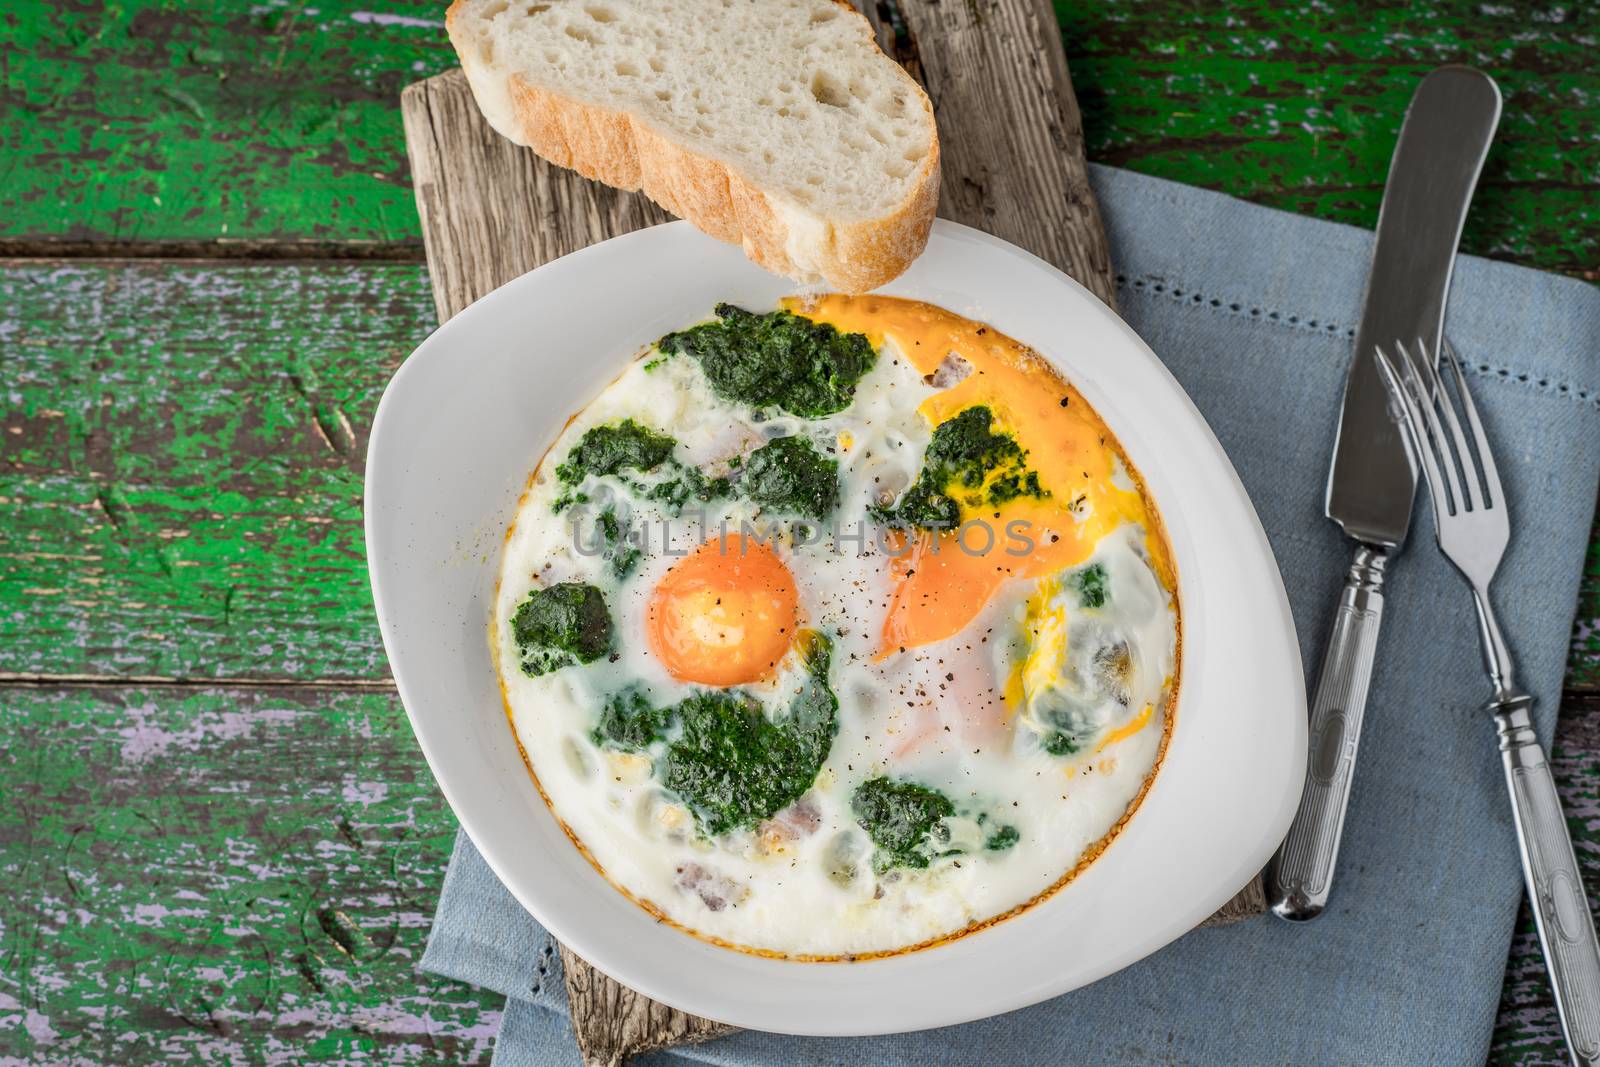 Florentine eggs with pureed spinach on the old wooden board